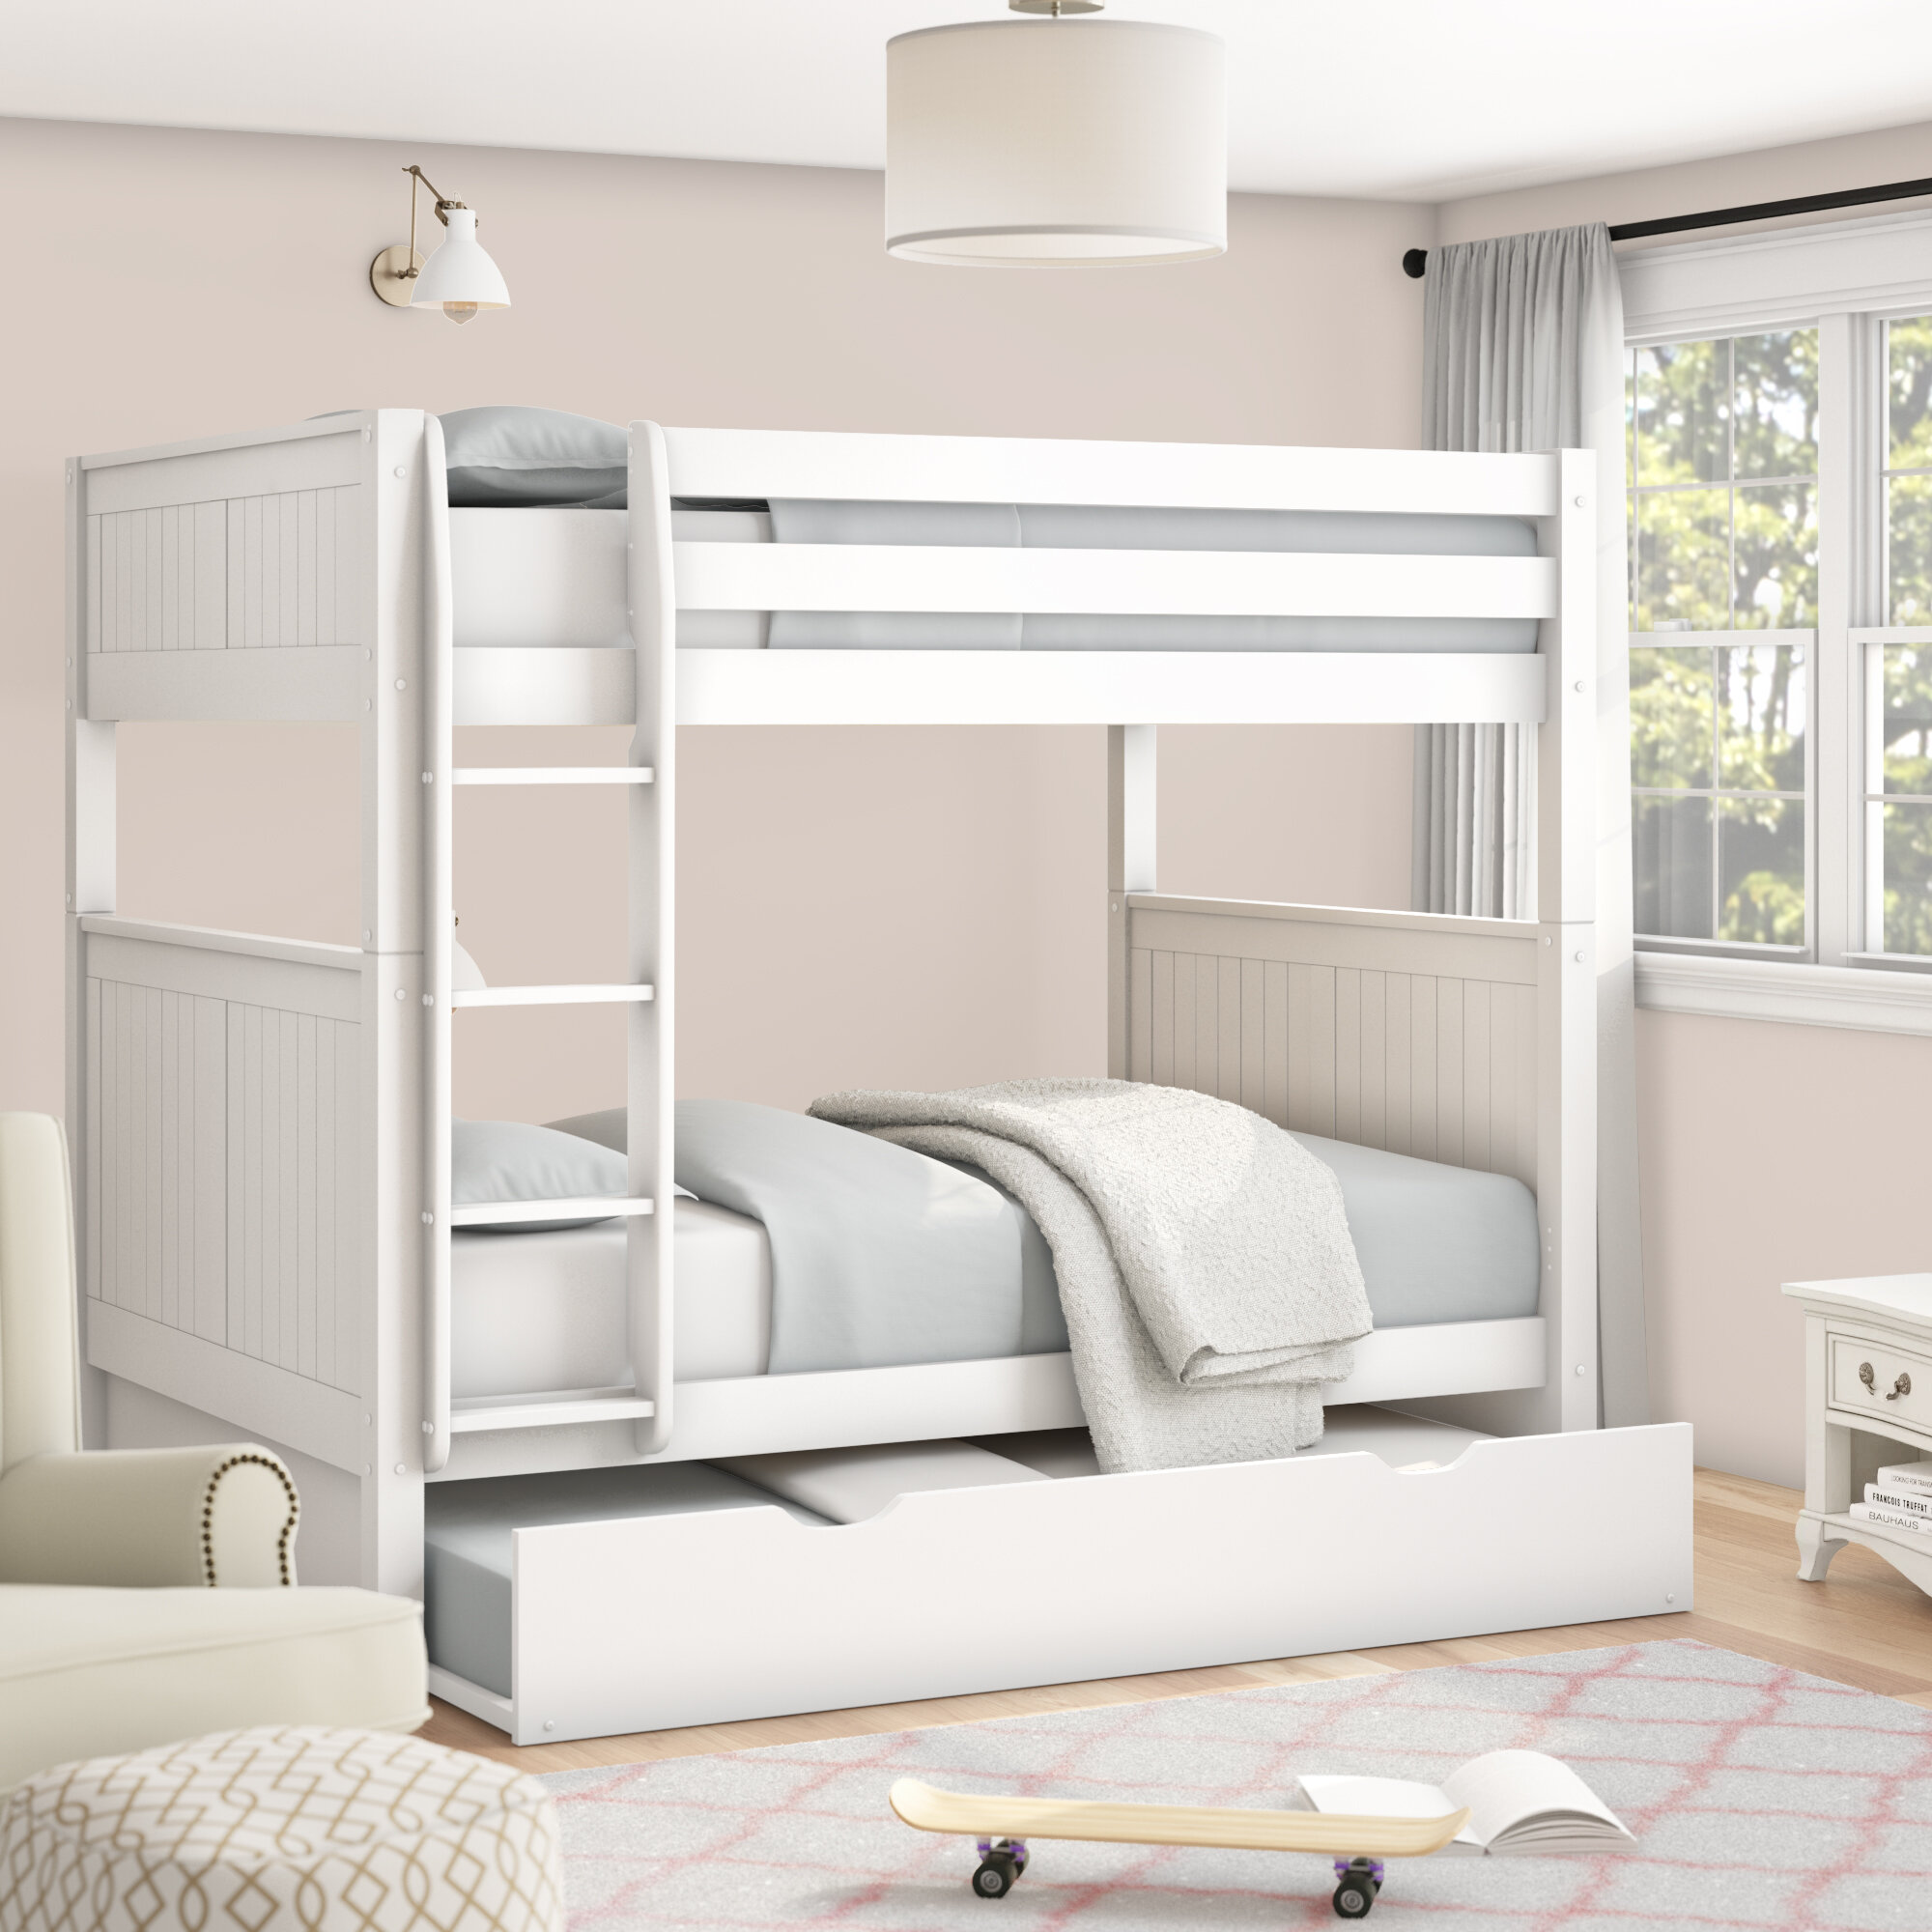 Bunk White Kids Beds You Ll Love In 2021 Wayfair